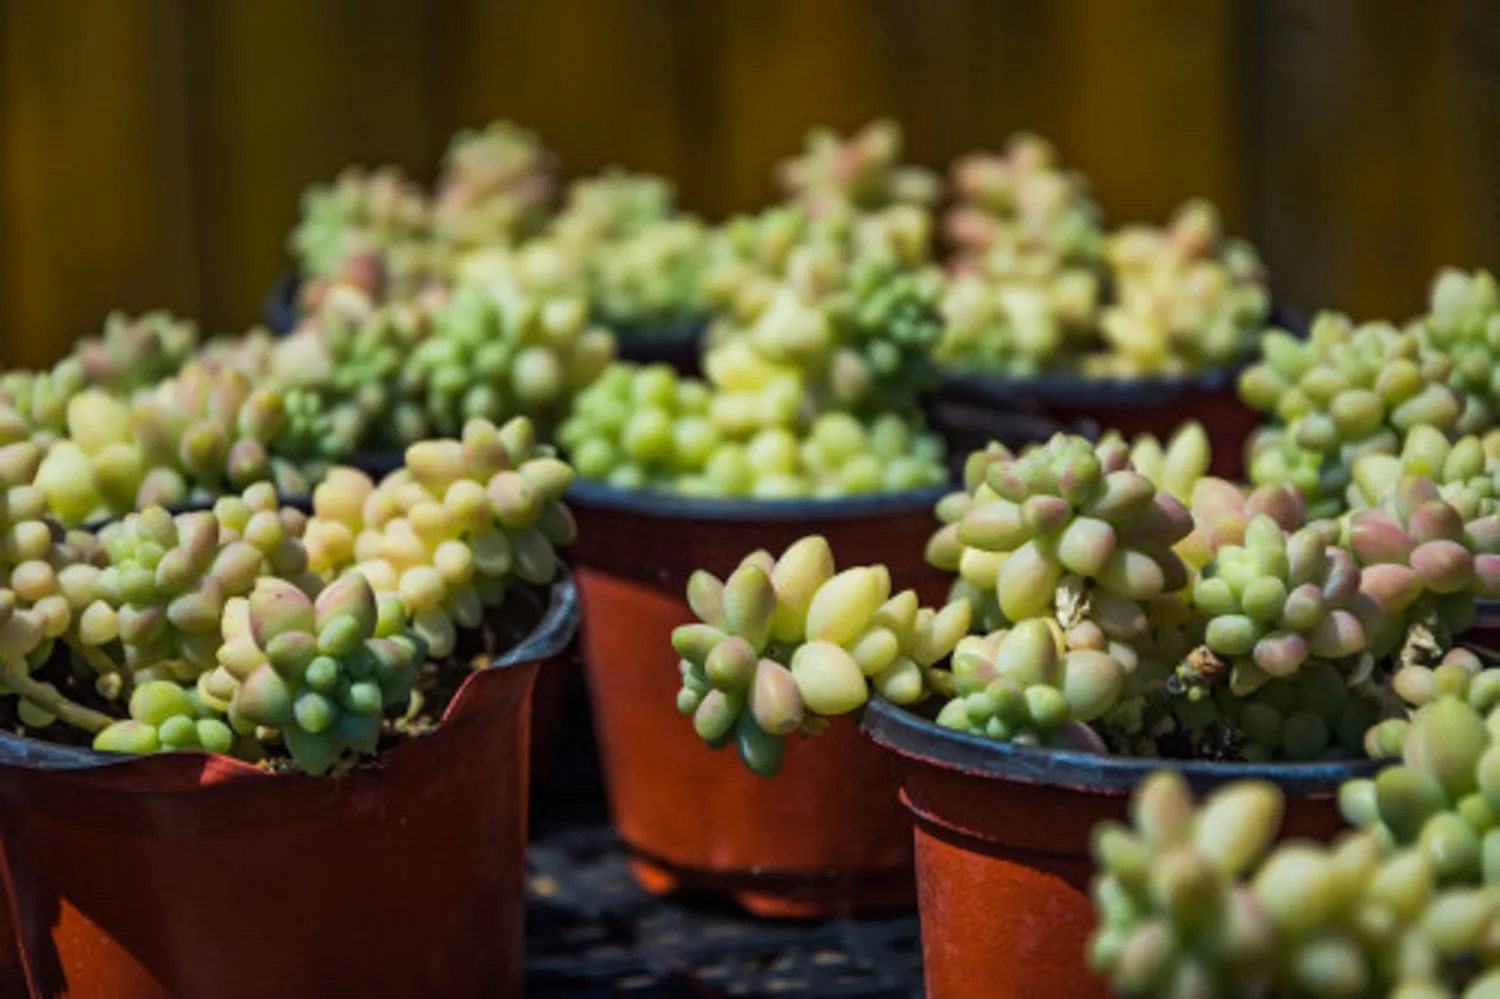 Burros Tail VS Donkey Tail - Differences And Similarities